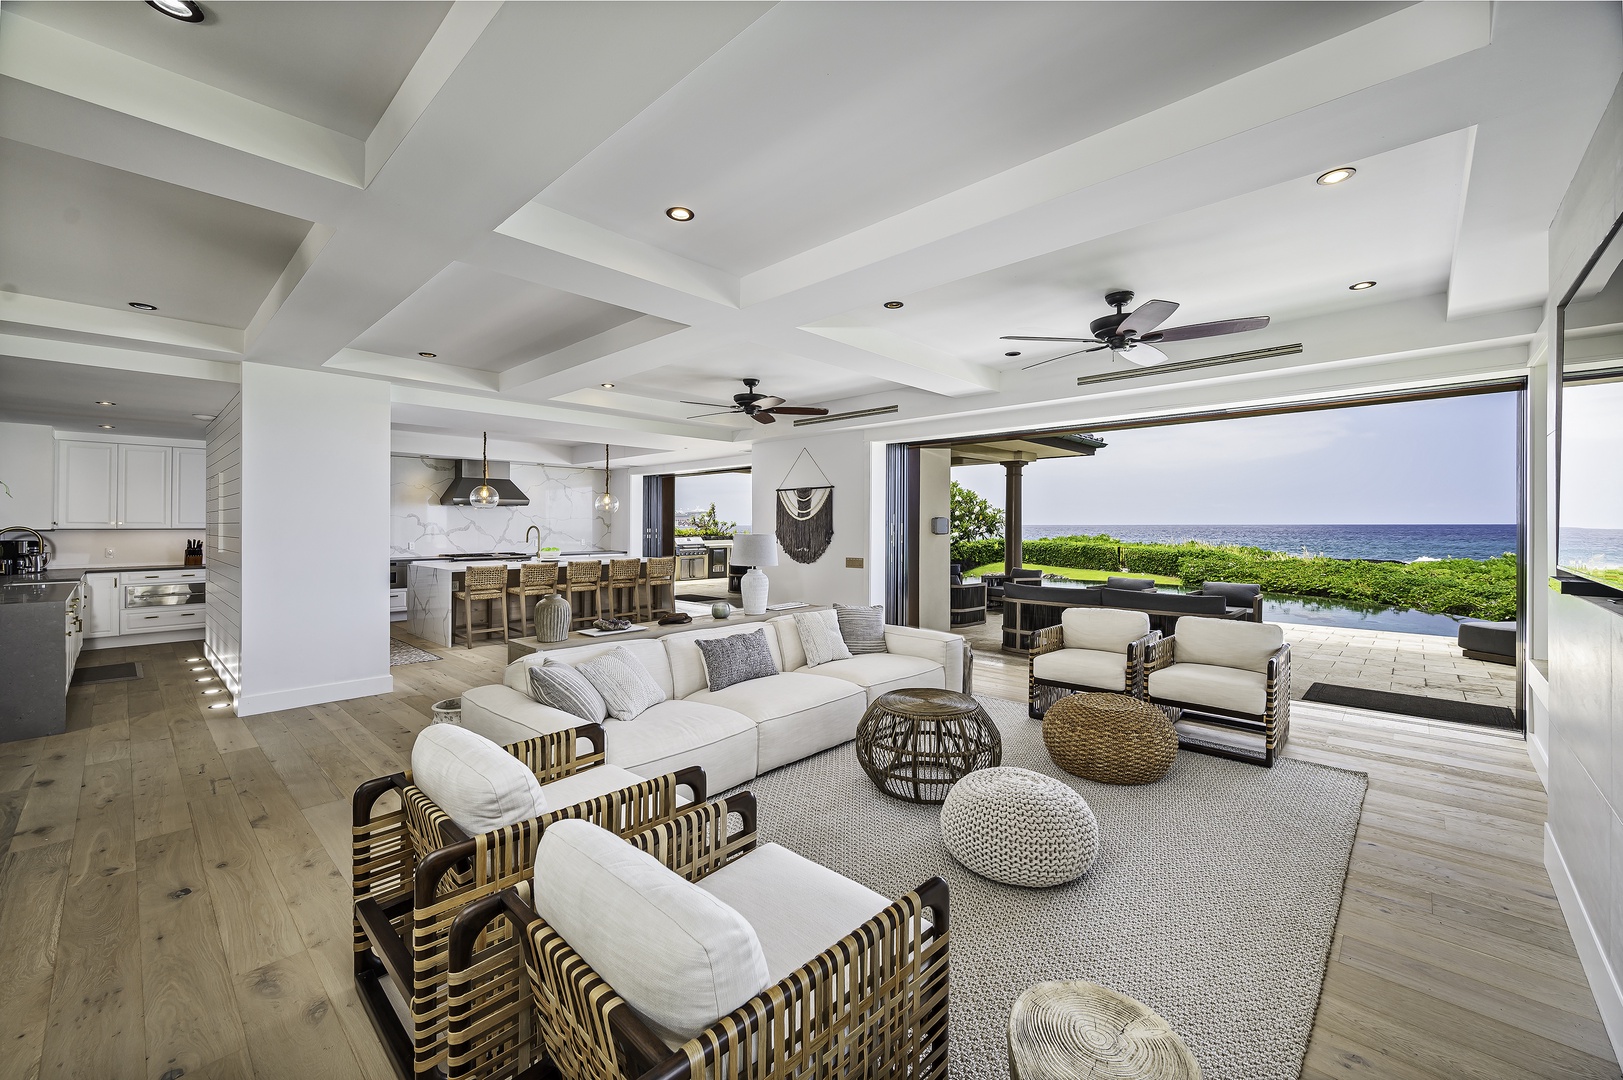 Kailua Kona Vacation Rentals, Alohi Kai Estate** - Open concept living room with built in 80 inch TV, Restoration Hardware furniture from their Luxury Beach Edition